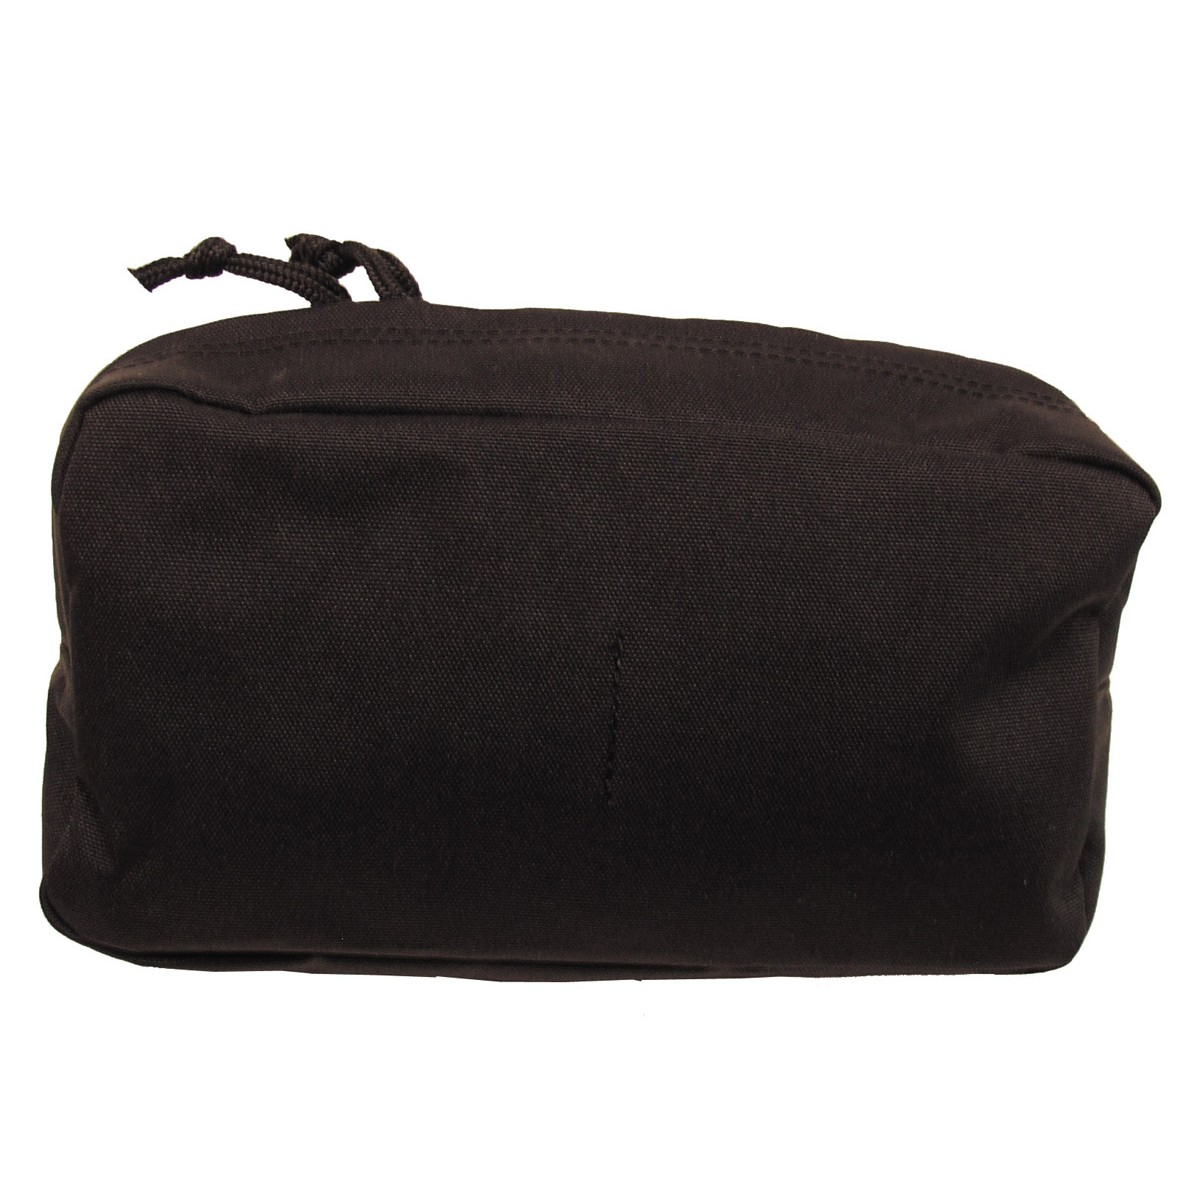 Tactical Utility Mollle Large Pouch - Black